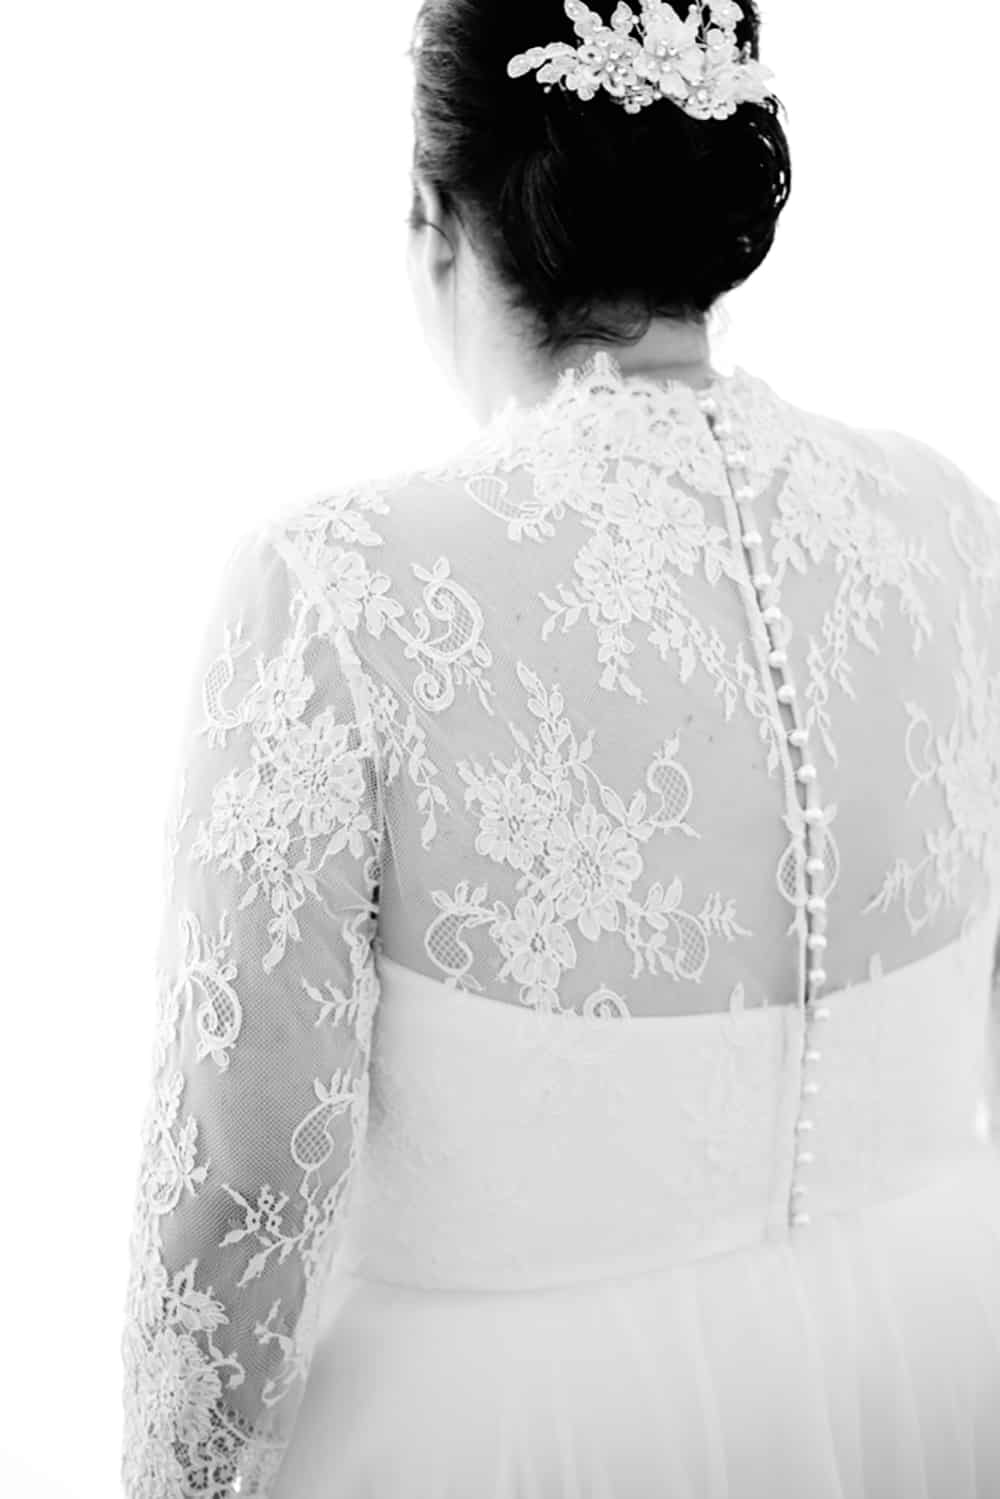 We love the sheer lace back on this wedding dress worn by plus-size bride Amanda.